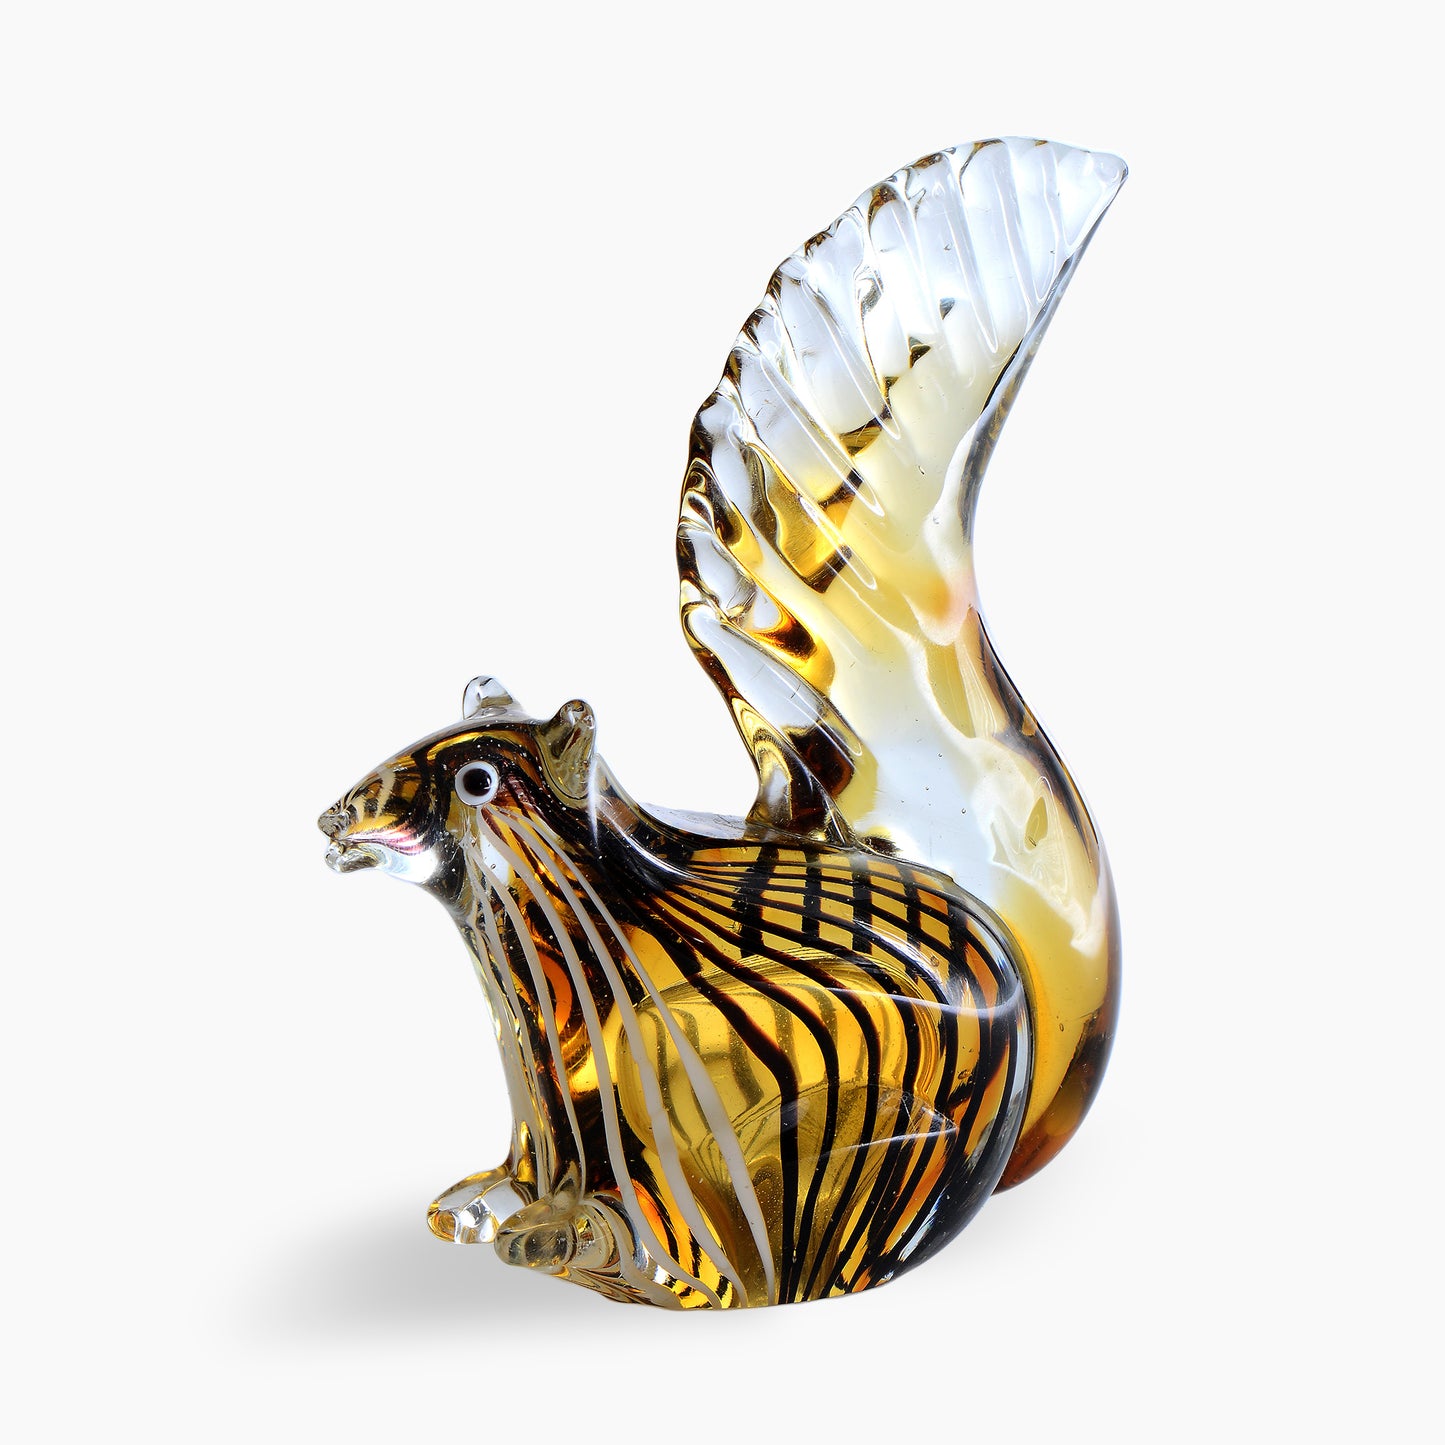 Hand Blown Colored Glass Squirrel Display Figurine